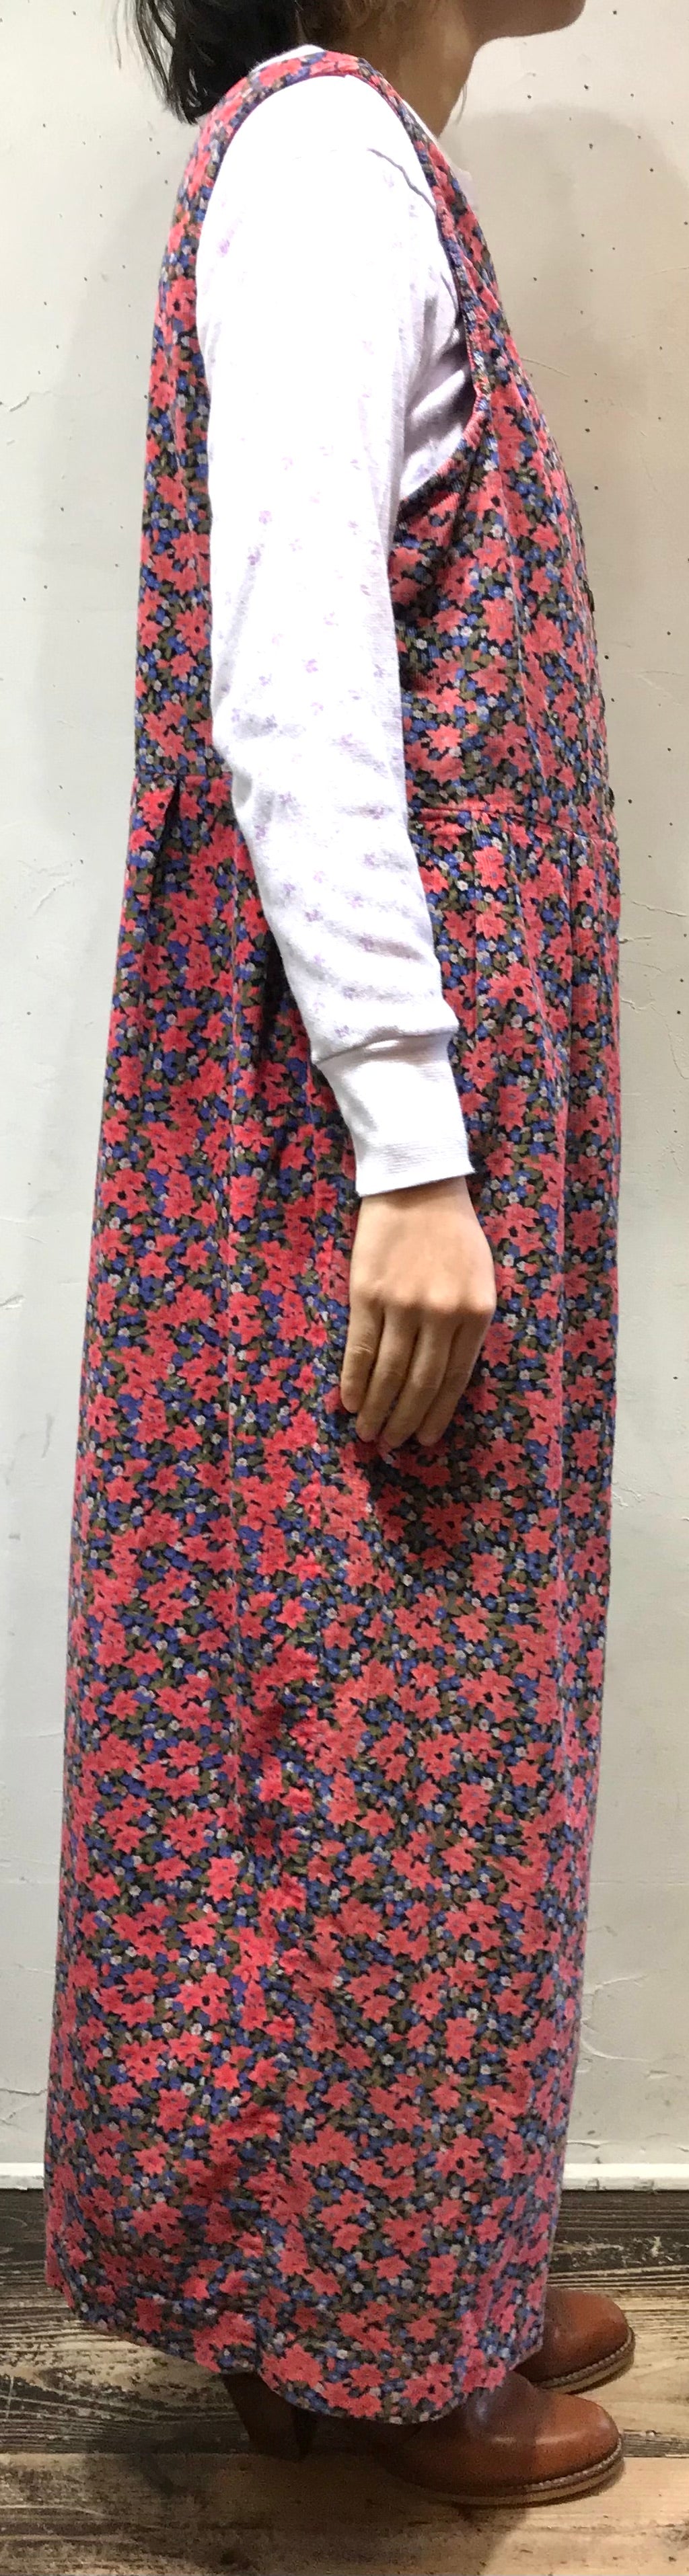 Vintage Corduroy Over Dress MADE IN USA [L25799]